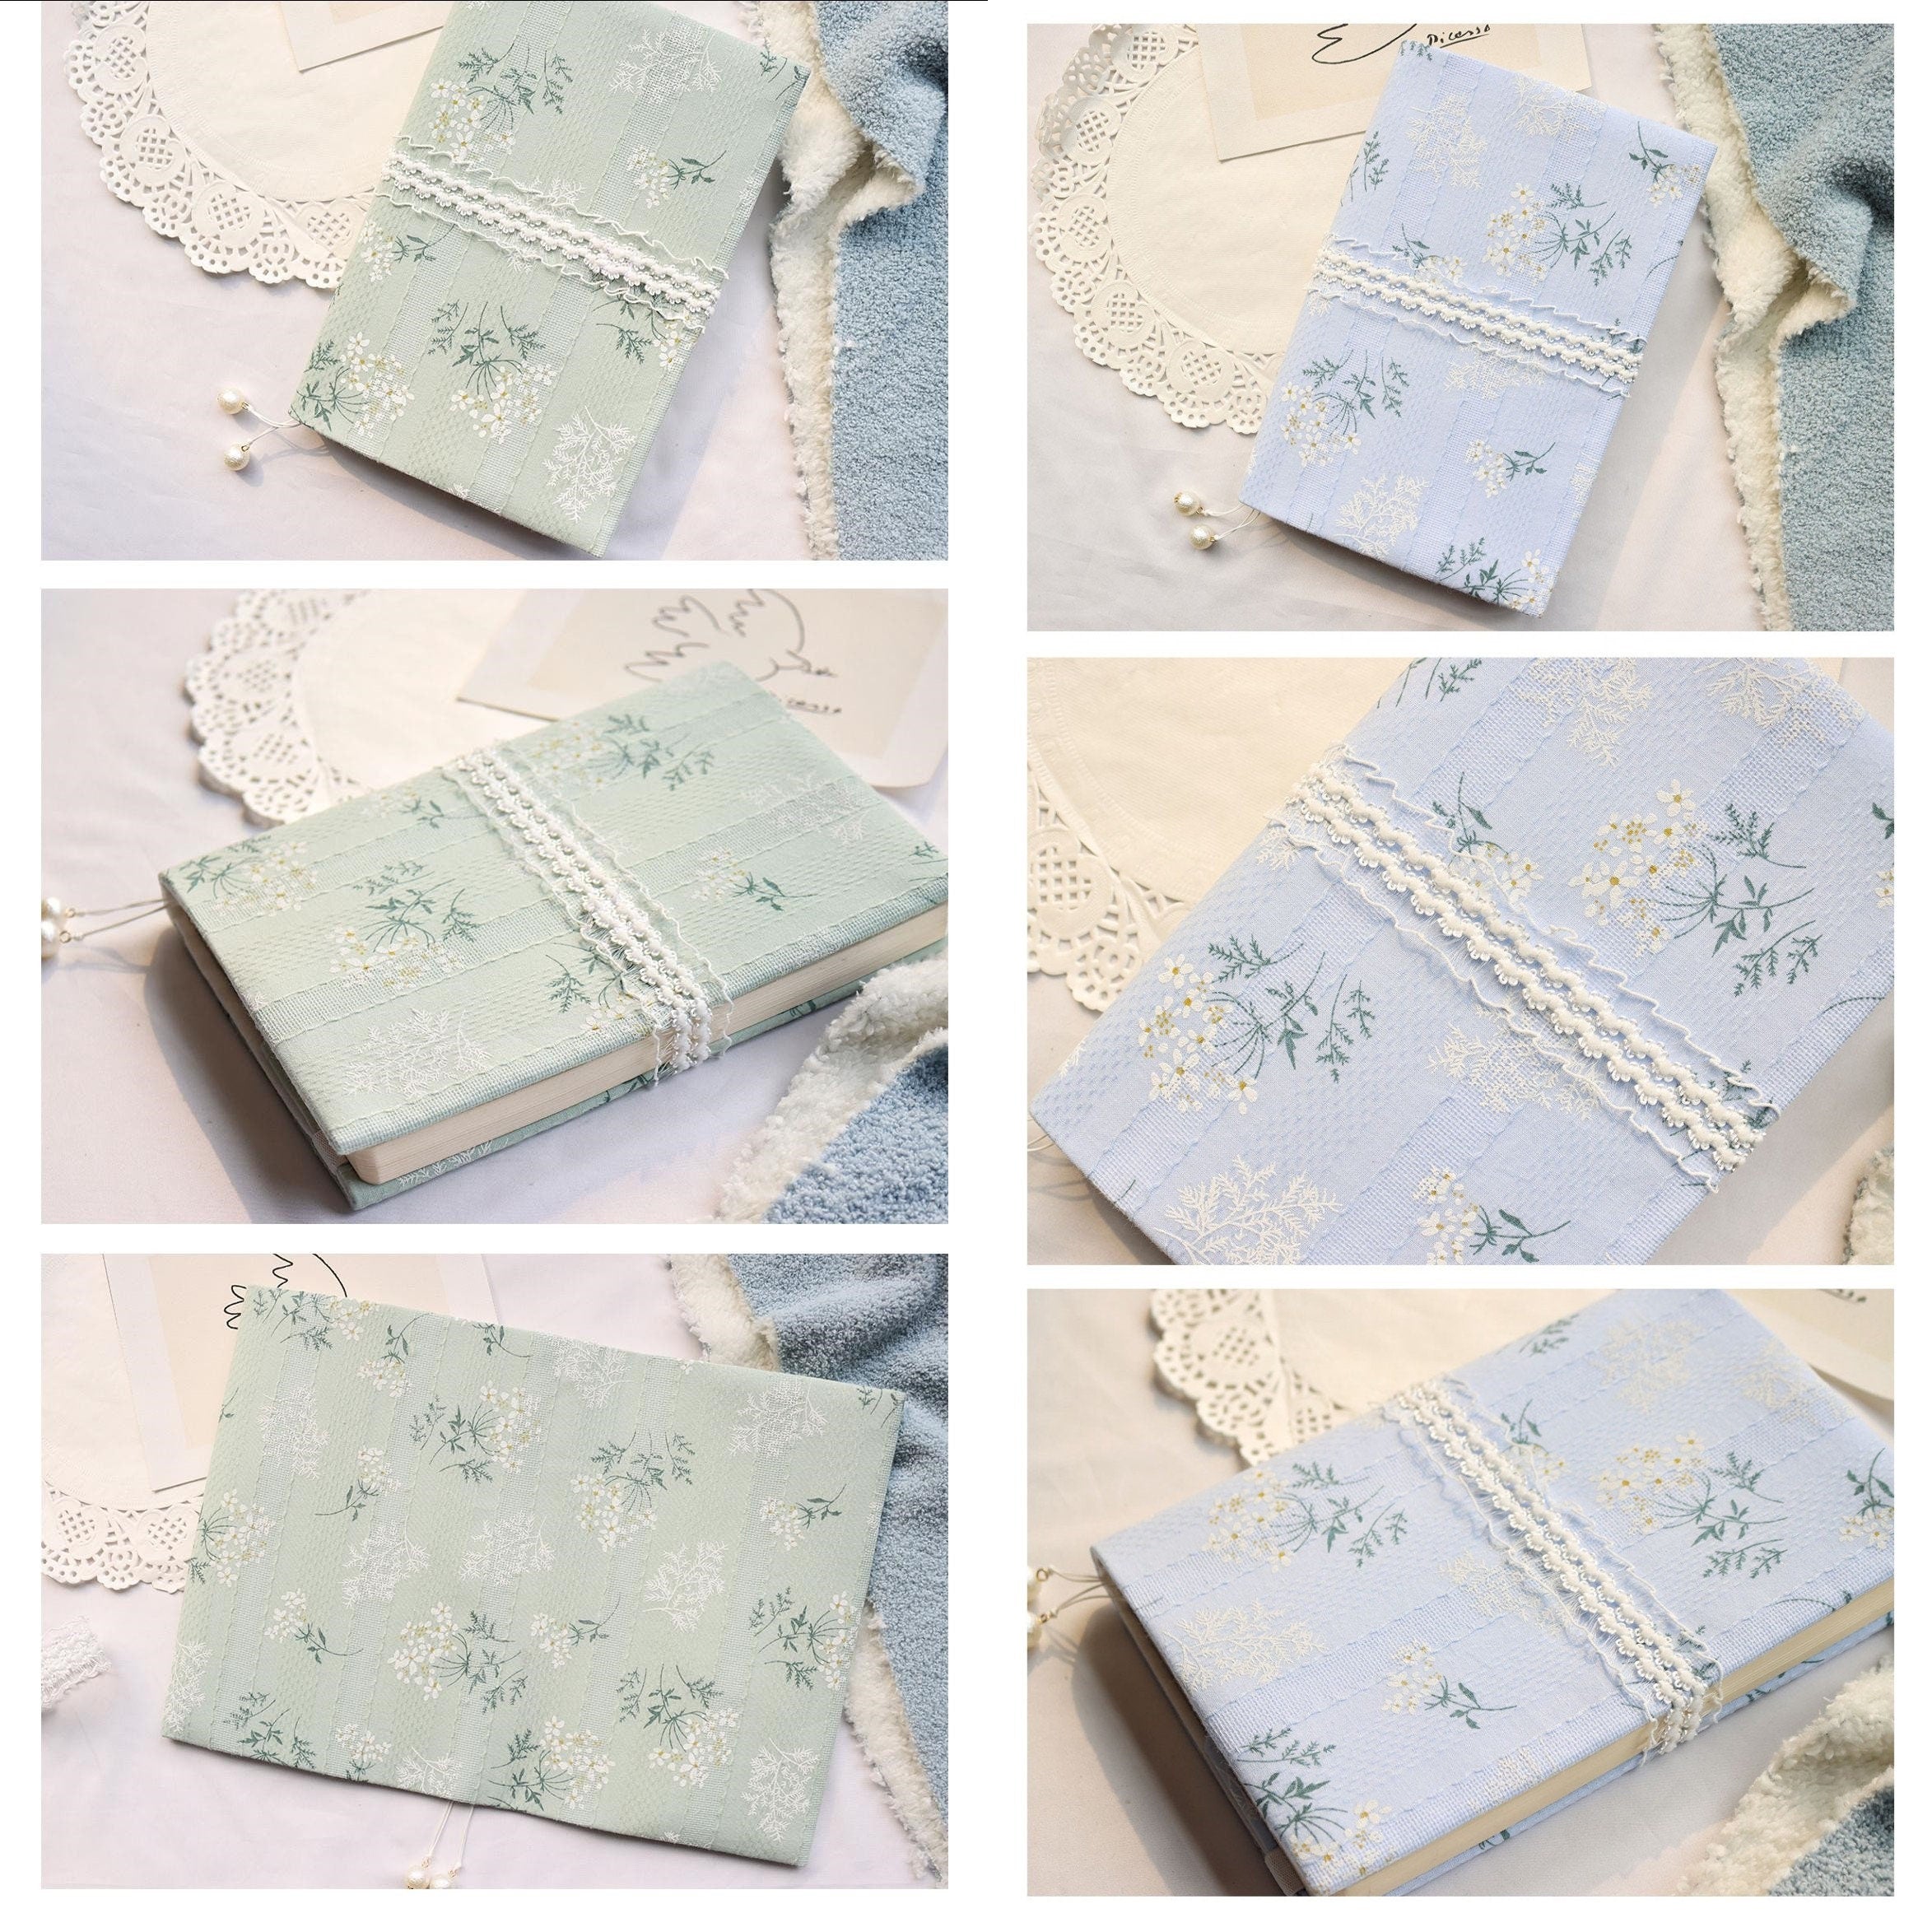 Floral Lace Notebook Journal Cover Handmade Cloth Journal Sleeve Fresh Portable Notepad A5 A6 Yubai Personalized Book Cover Girls' Gift